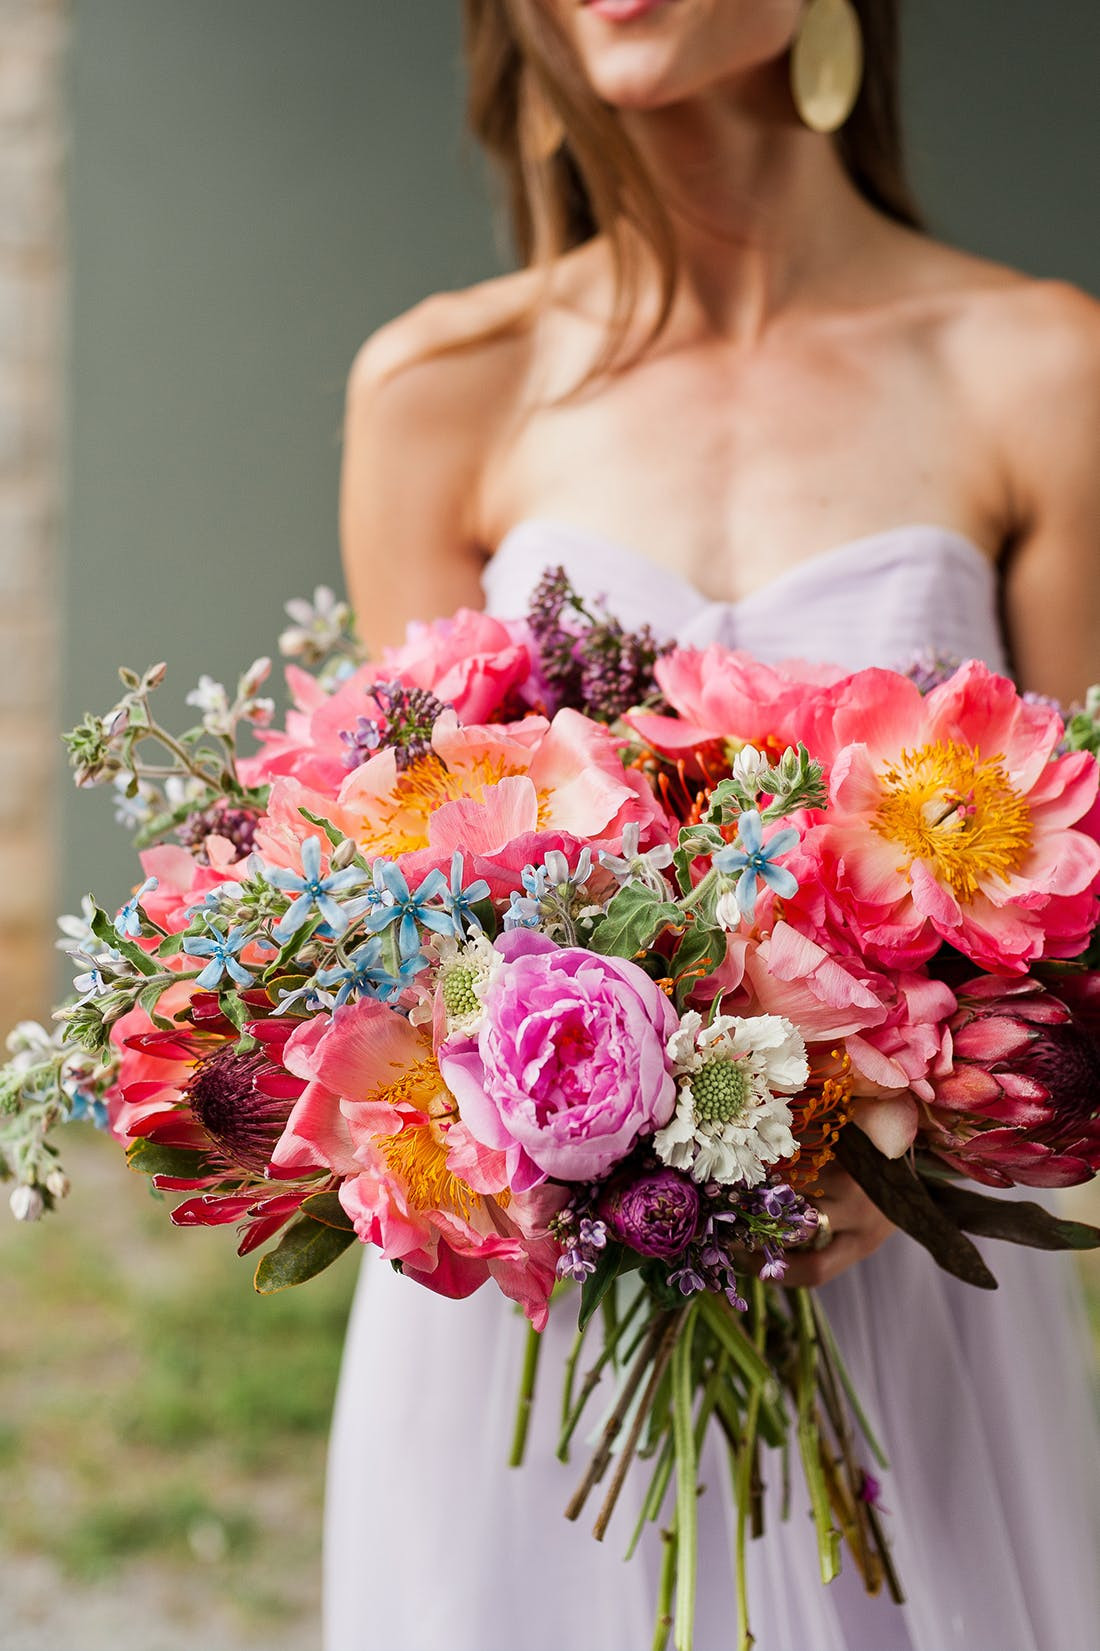 Wedding Flowers DIY
 Check Out This Stunning Wedding Bouquet You Can DIY